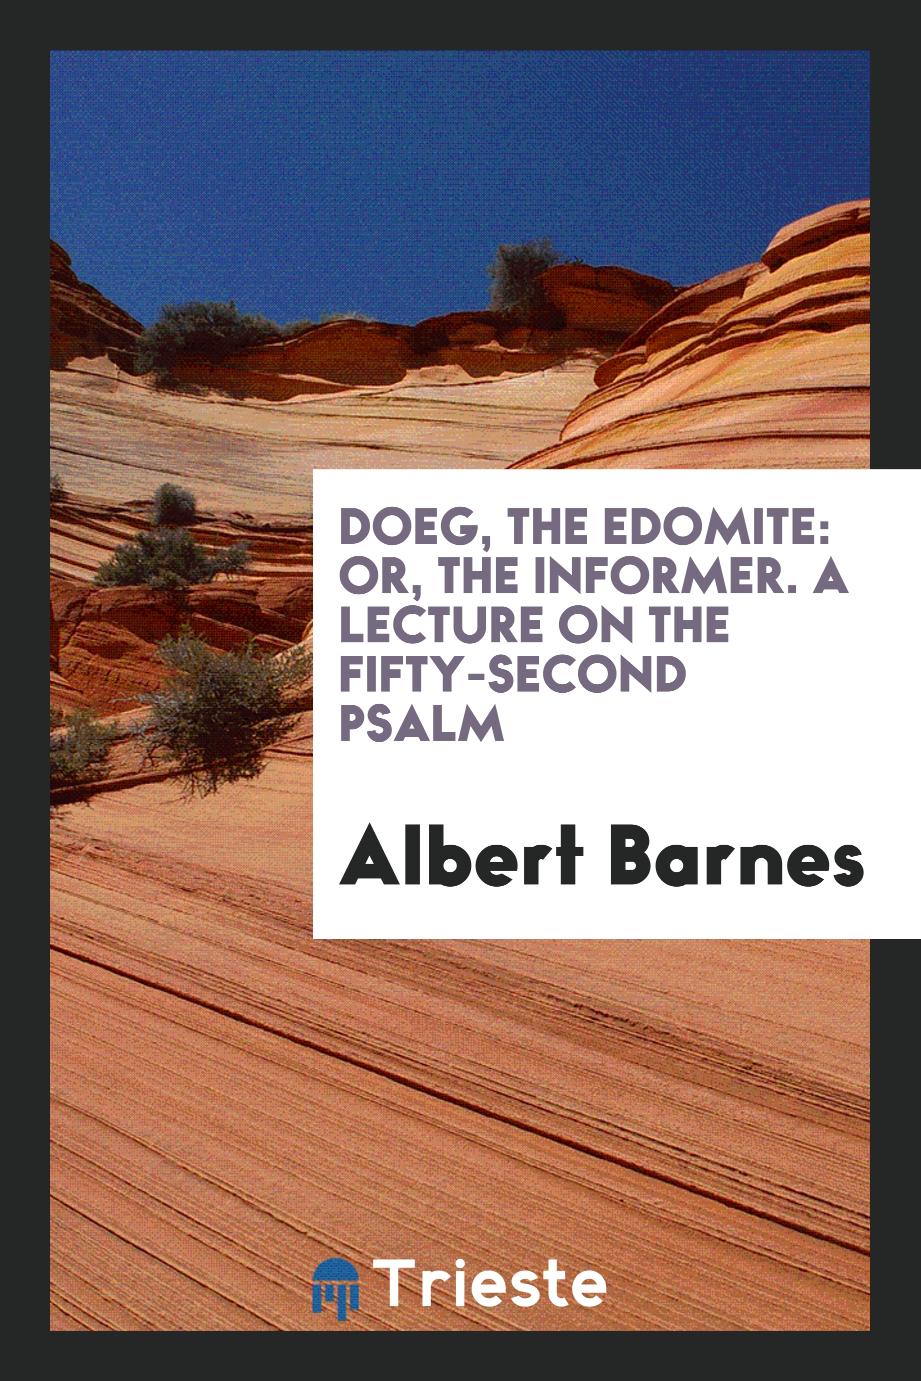 Doeg, the Edomite: Or, The Informer. A Lecture on the Fifty-second Psalm